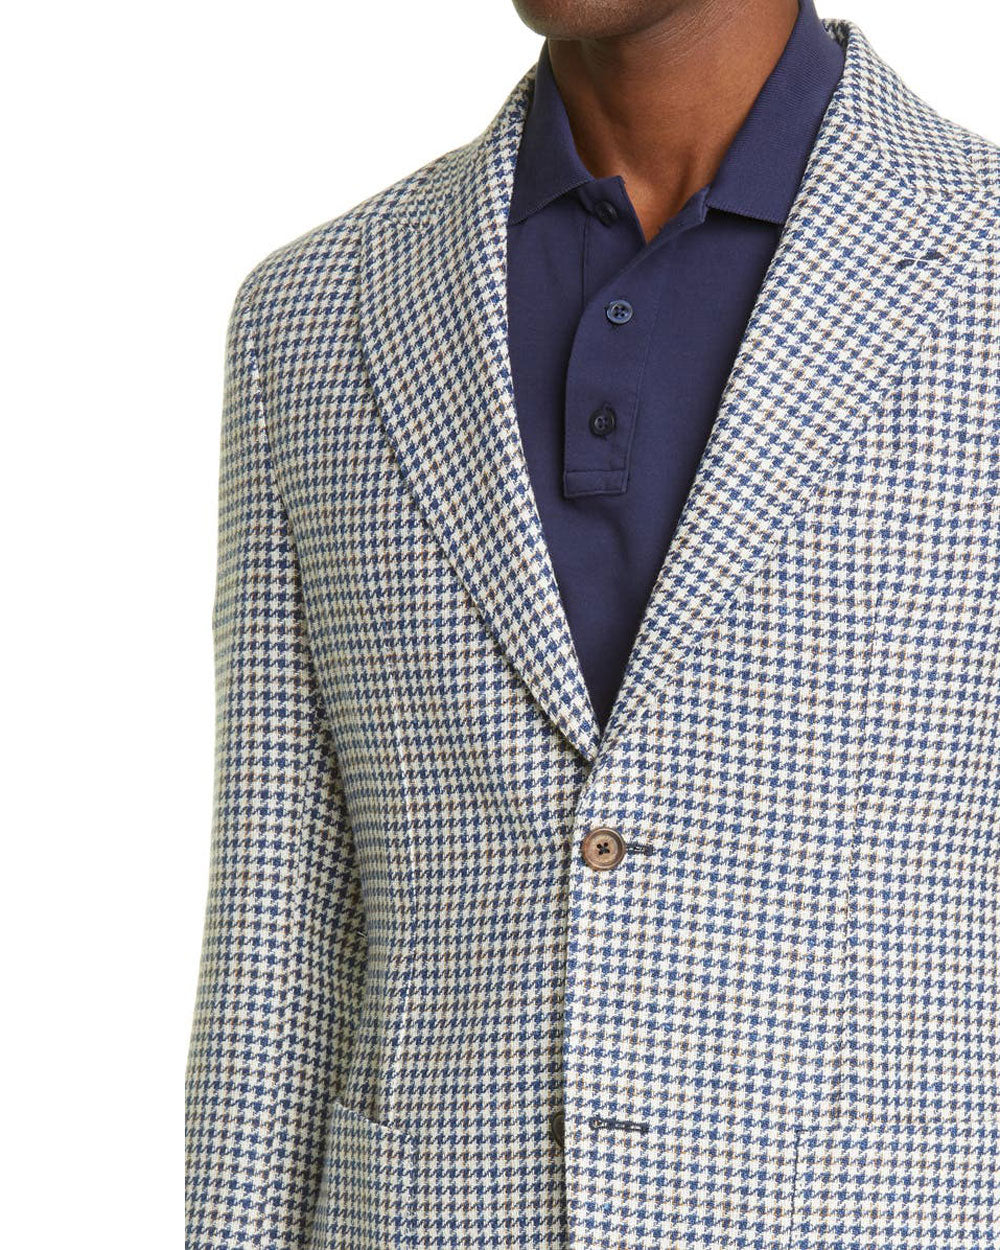 Navy with Brown Houndstooth Sportcoat